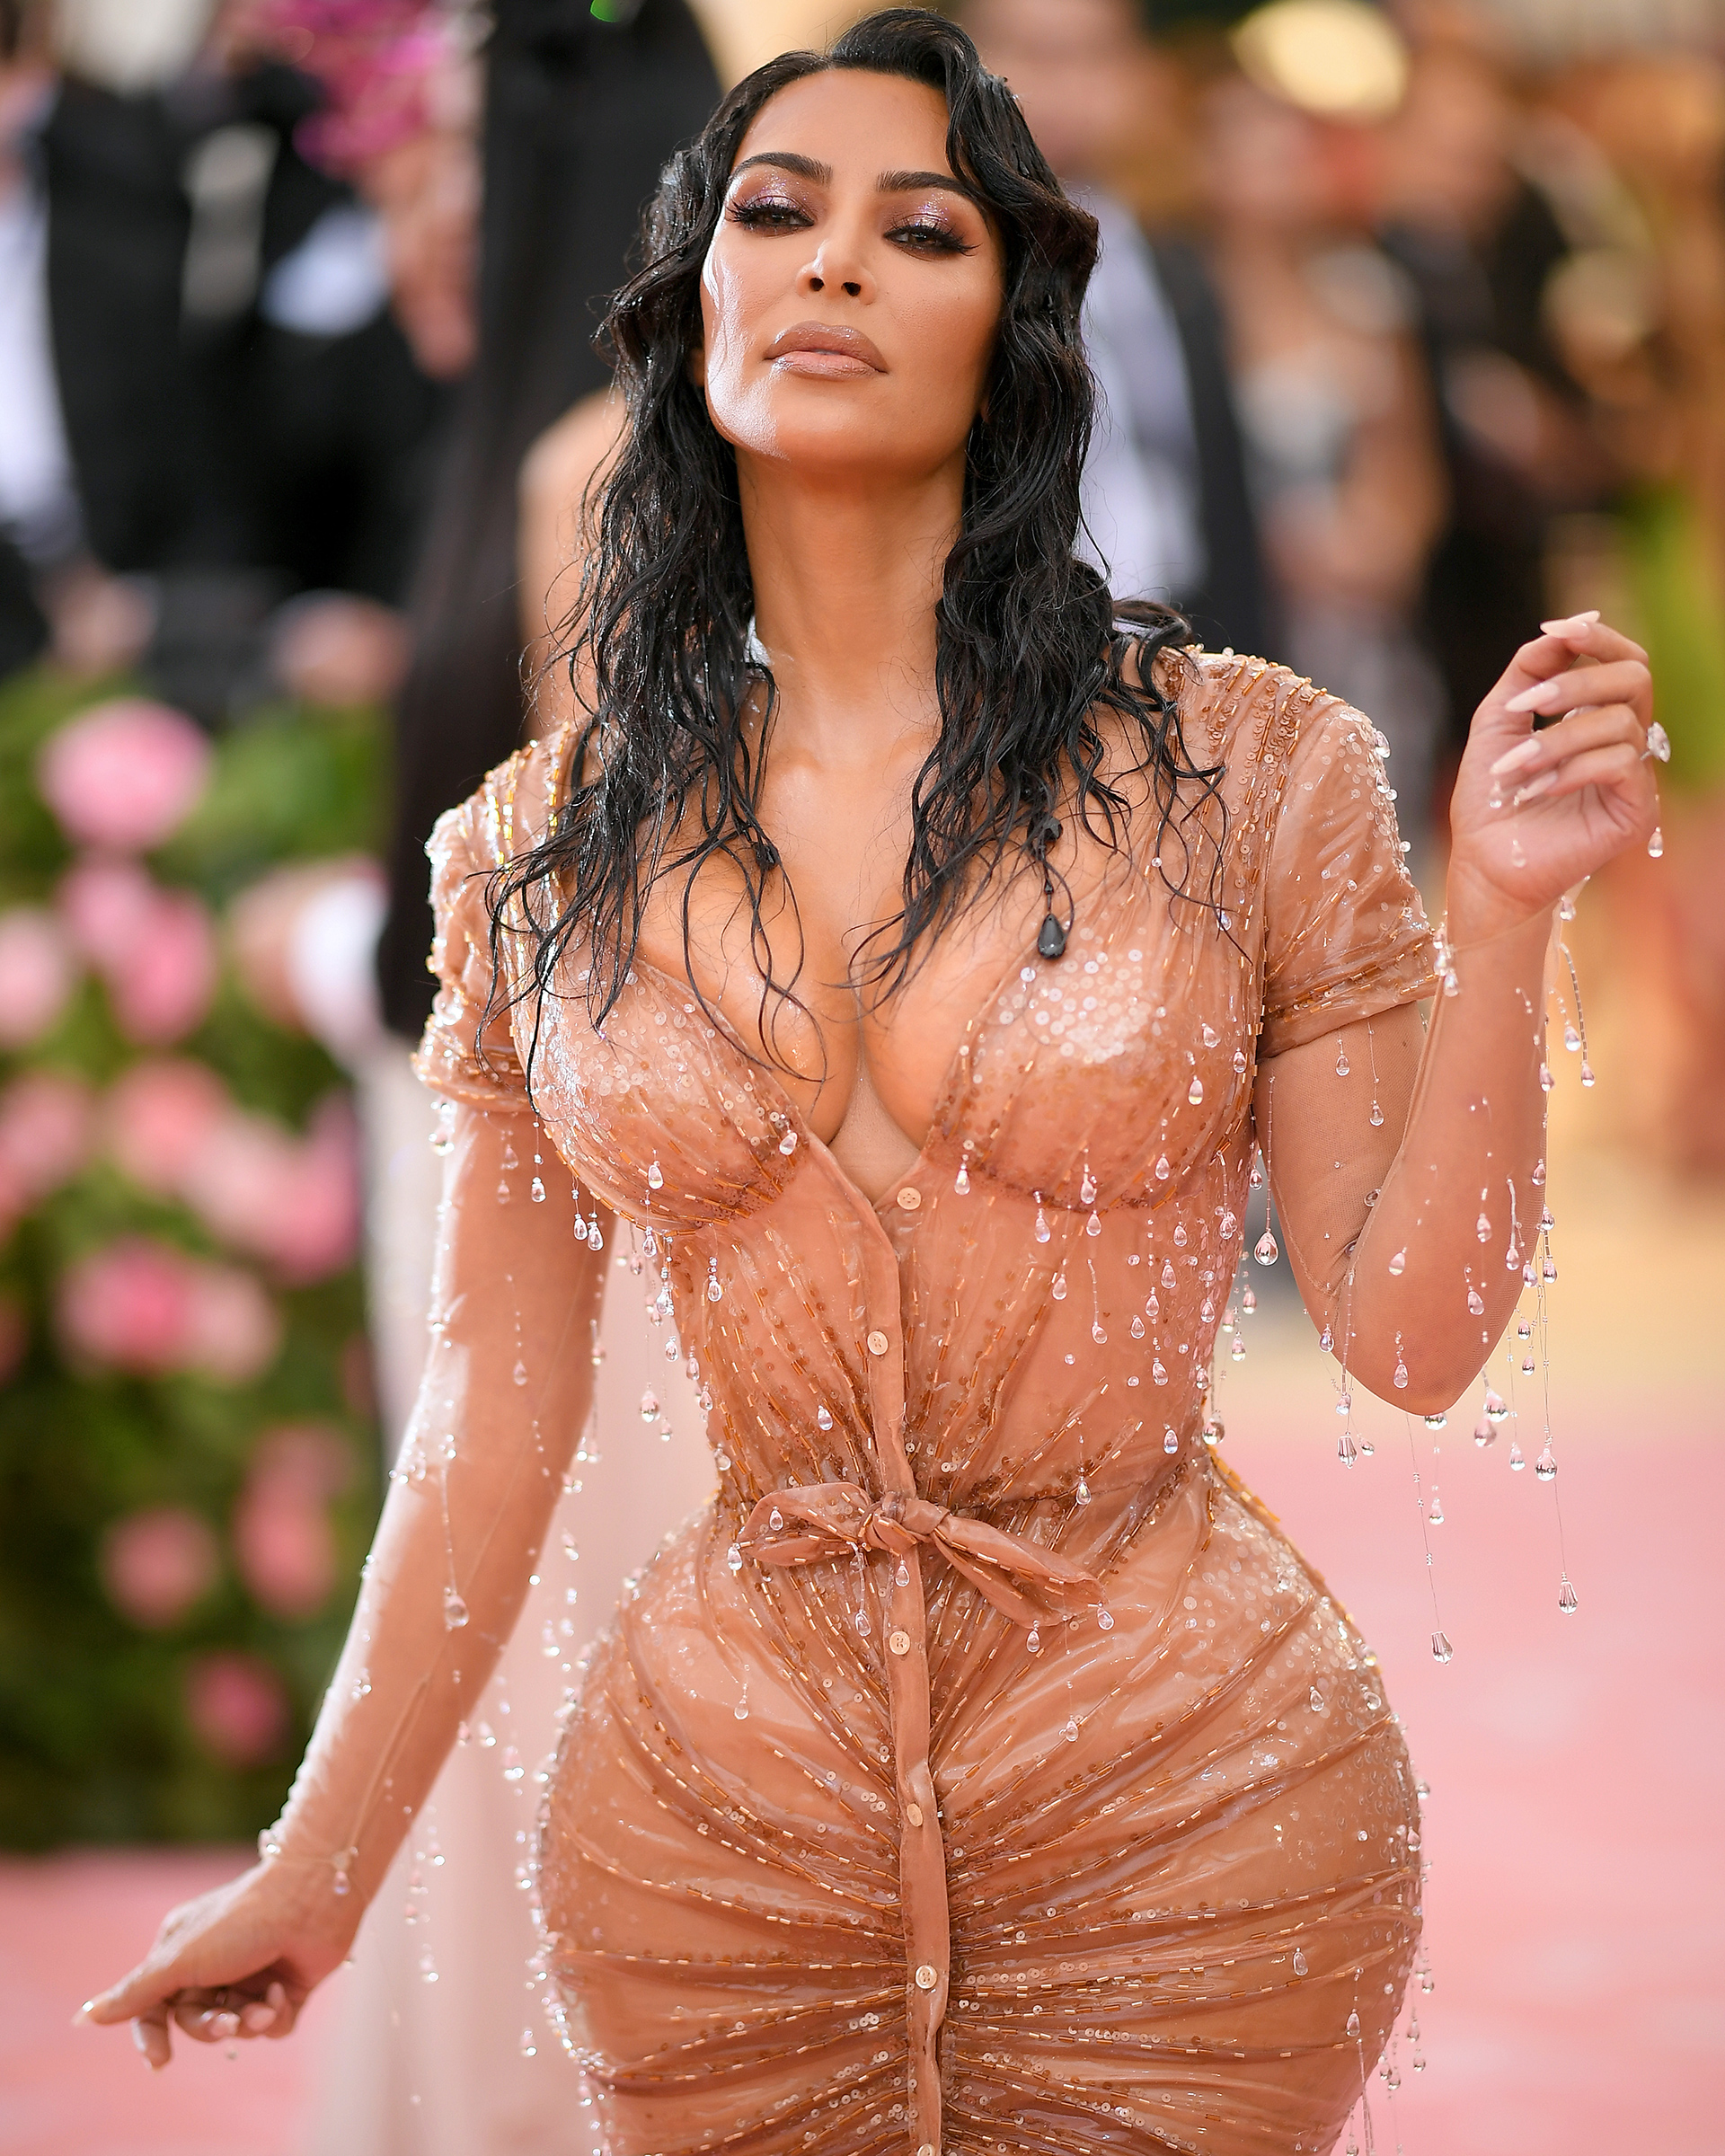 Kim Kardashian, wearing a custom latex Thierry Mugler dress, attends the Met Gala celebrating 'Camp: Notes on Fashion' at the Metropolitan Museum of Art on May 6, 2019 in New York City. (Neilson Barnard—Getty Images)